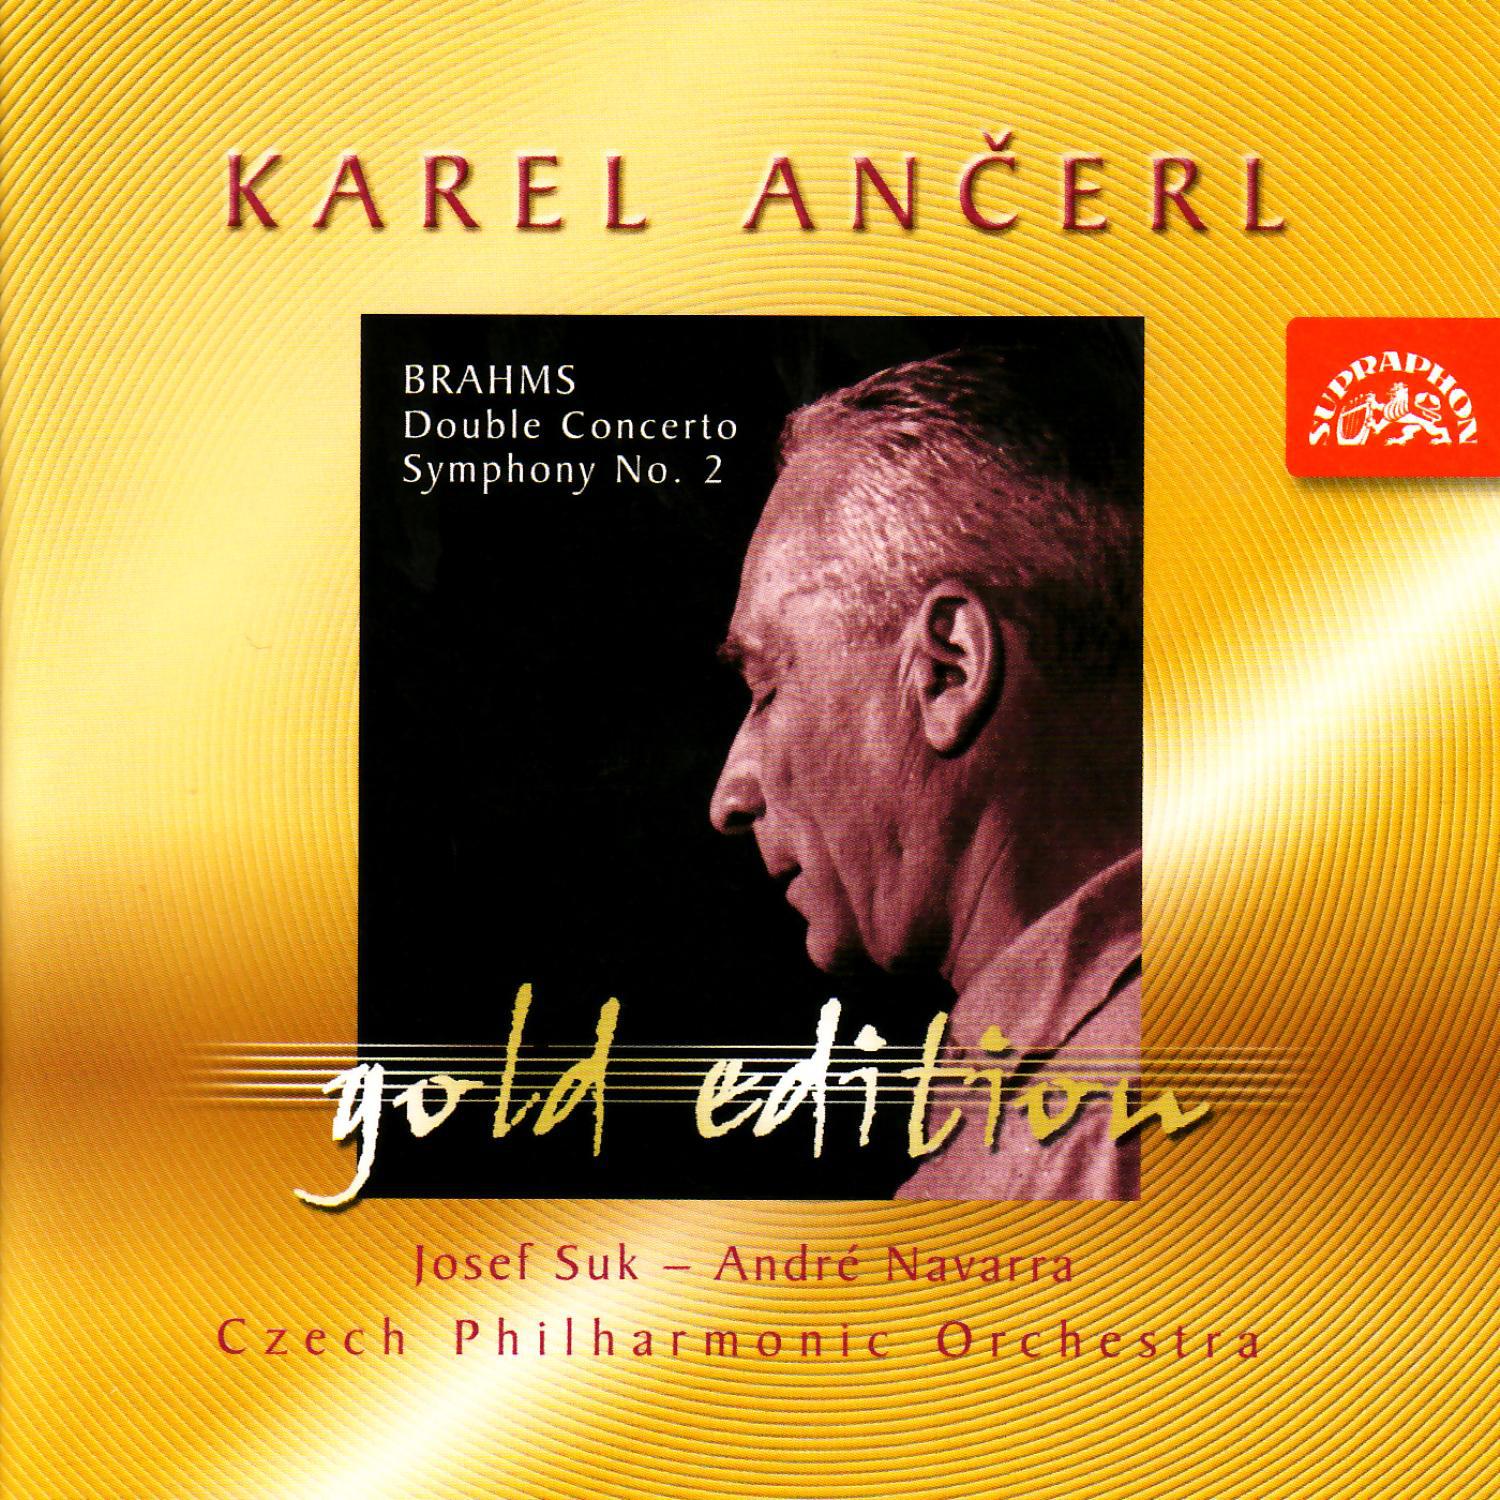 An erl Gold Edition 31 Brahms: Double Concerto, Symphony No. 2